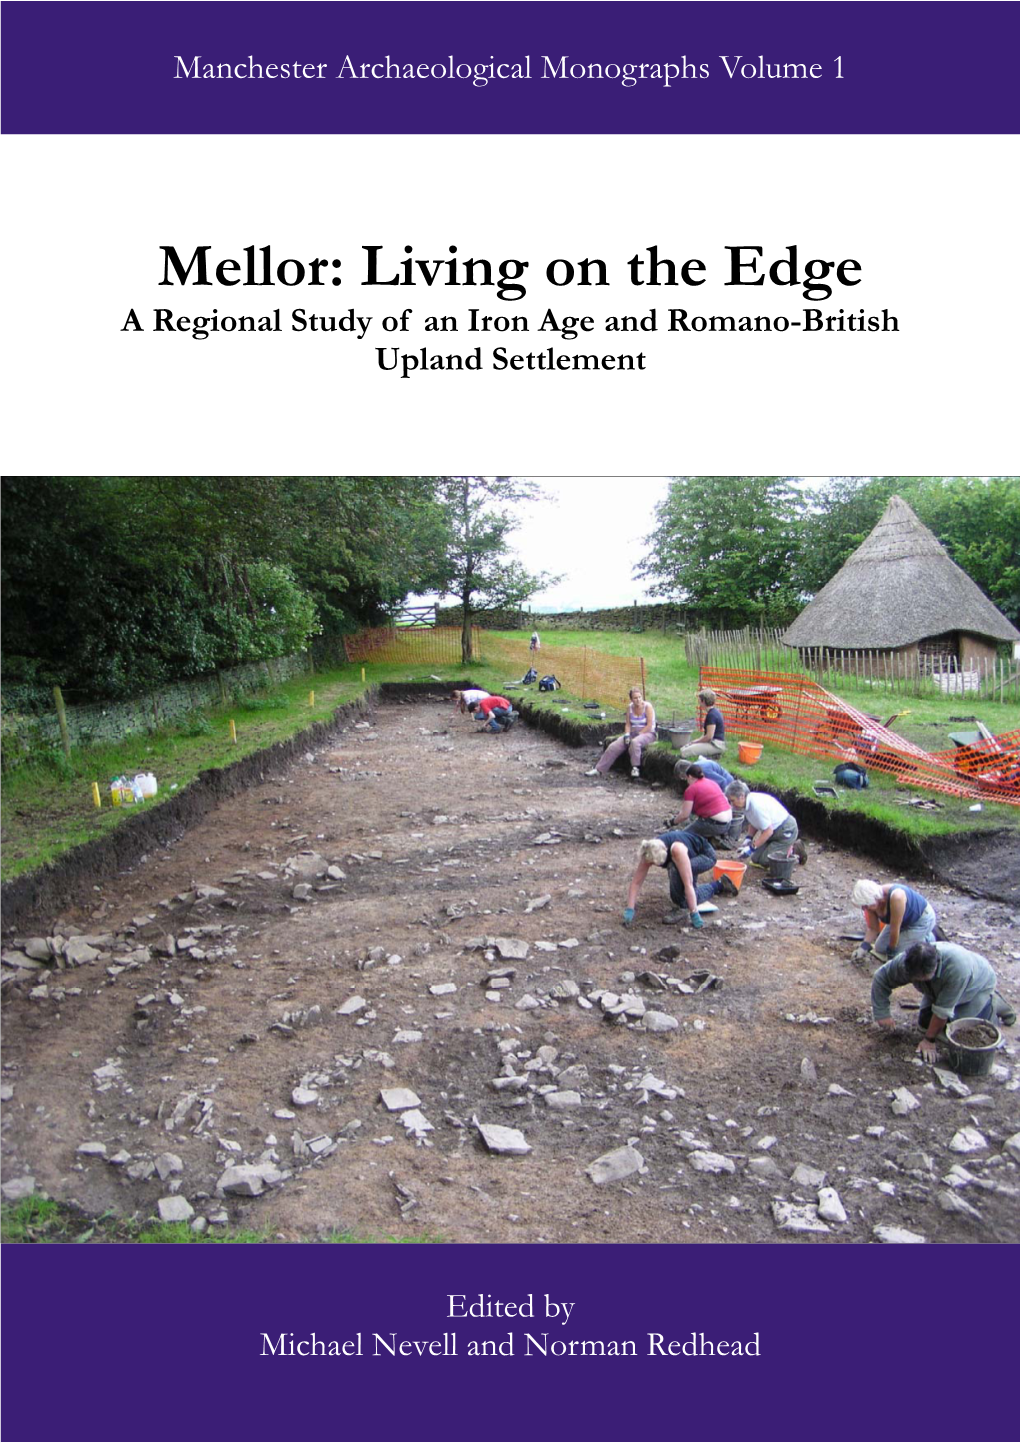 Mellor: Living on the Edge a Regional Study of an Iron Age and Romano-British Upland Settlement